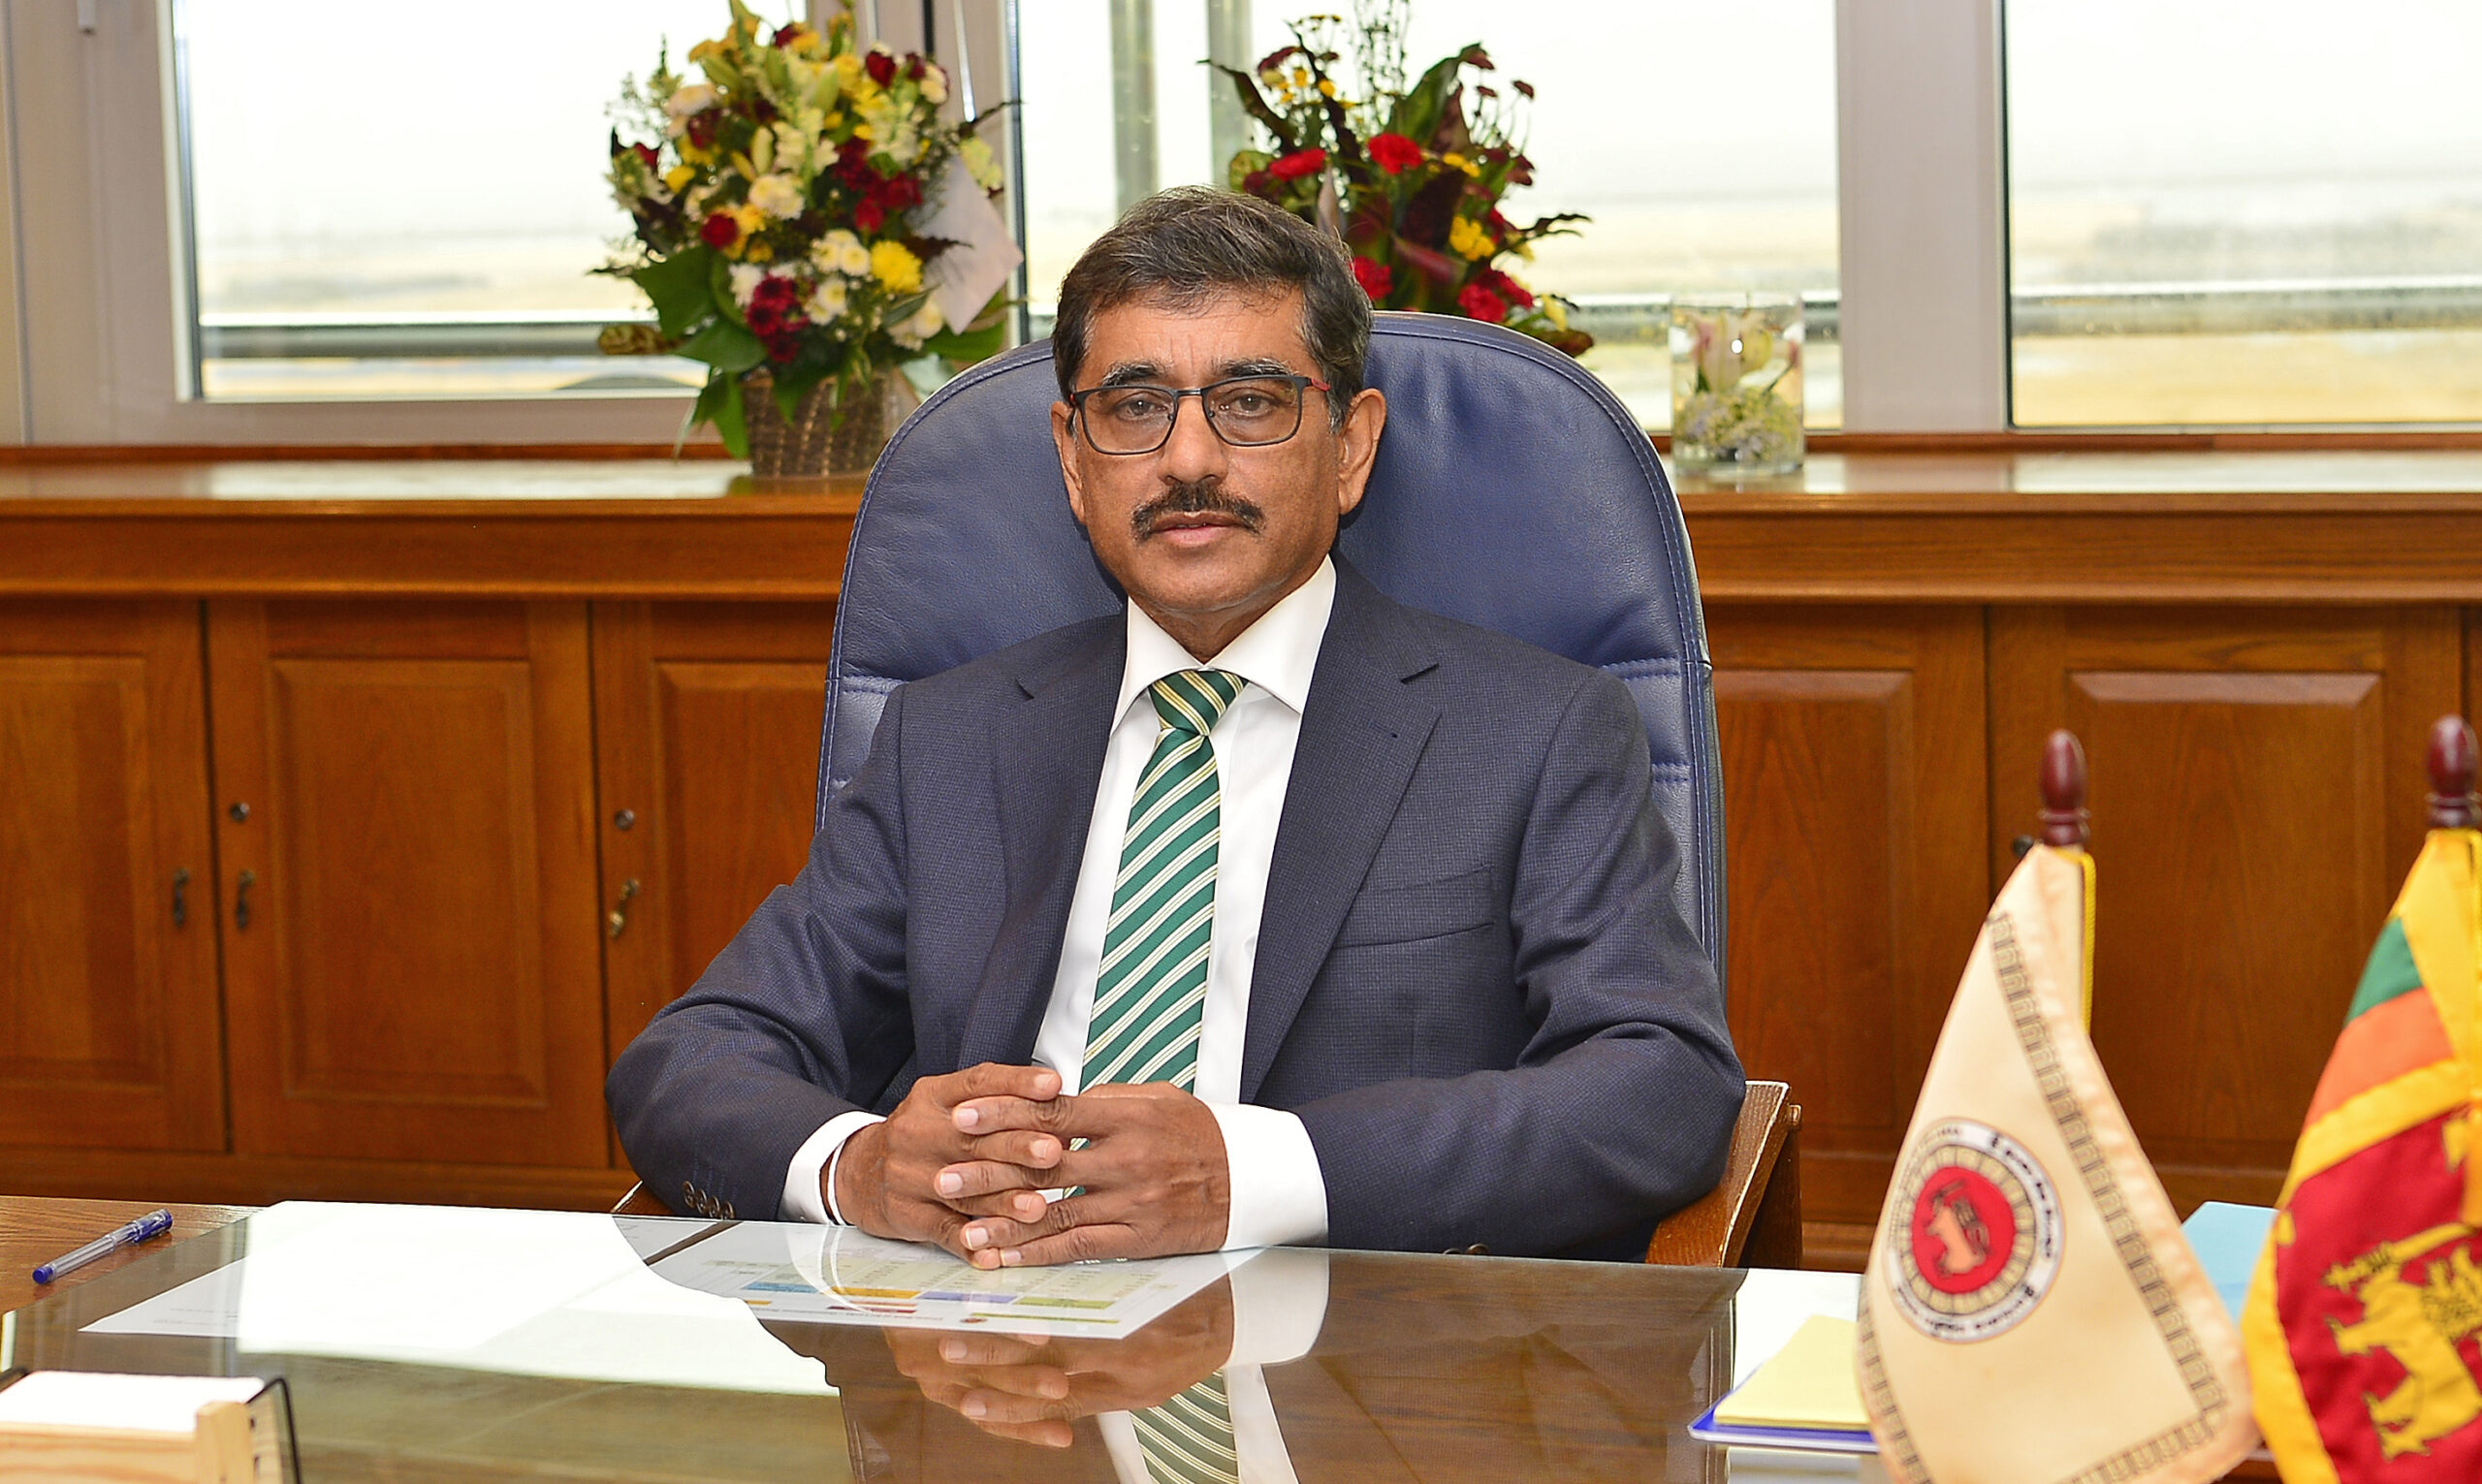 Dr Nandalal Weerasinghe appointed as the Governor of the Central Bank